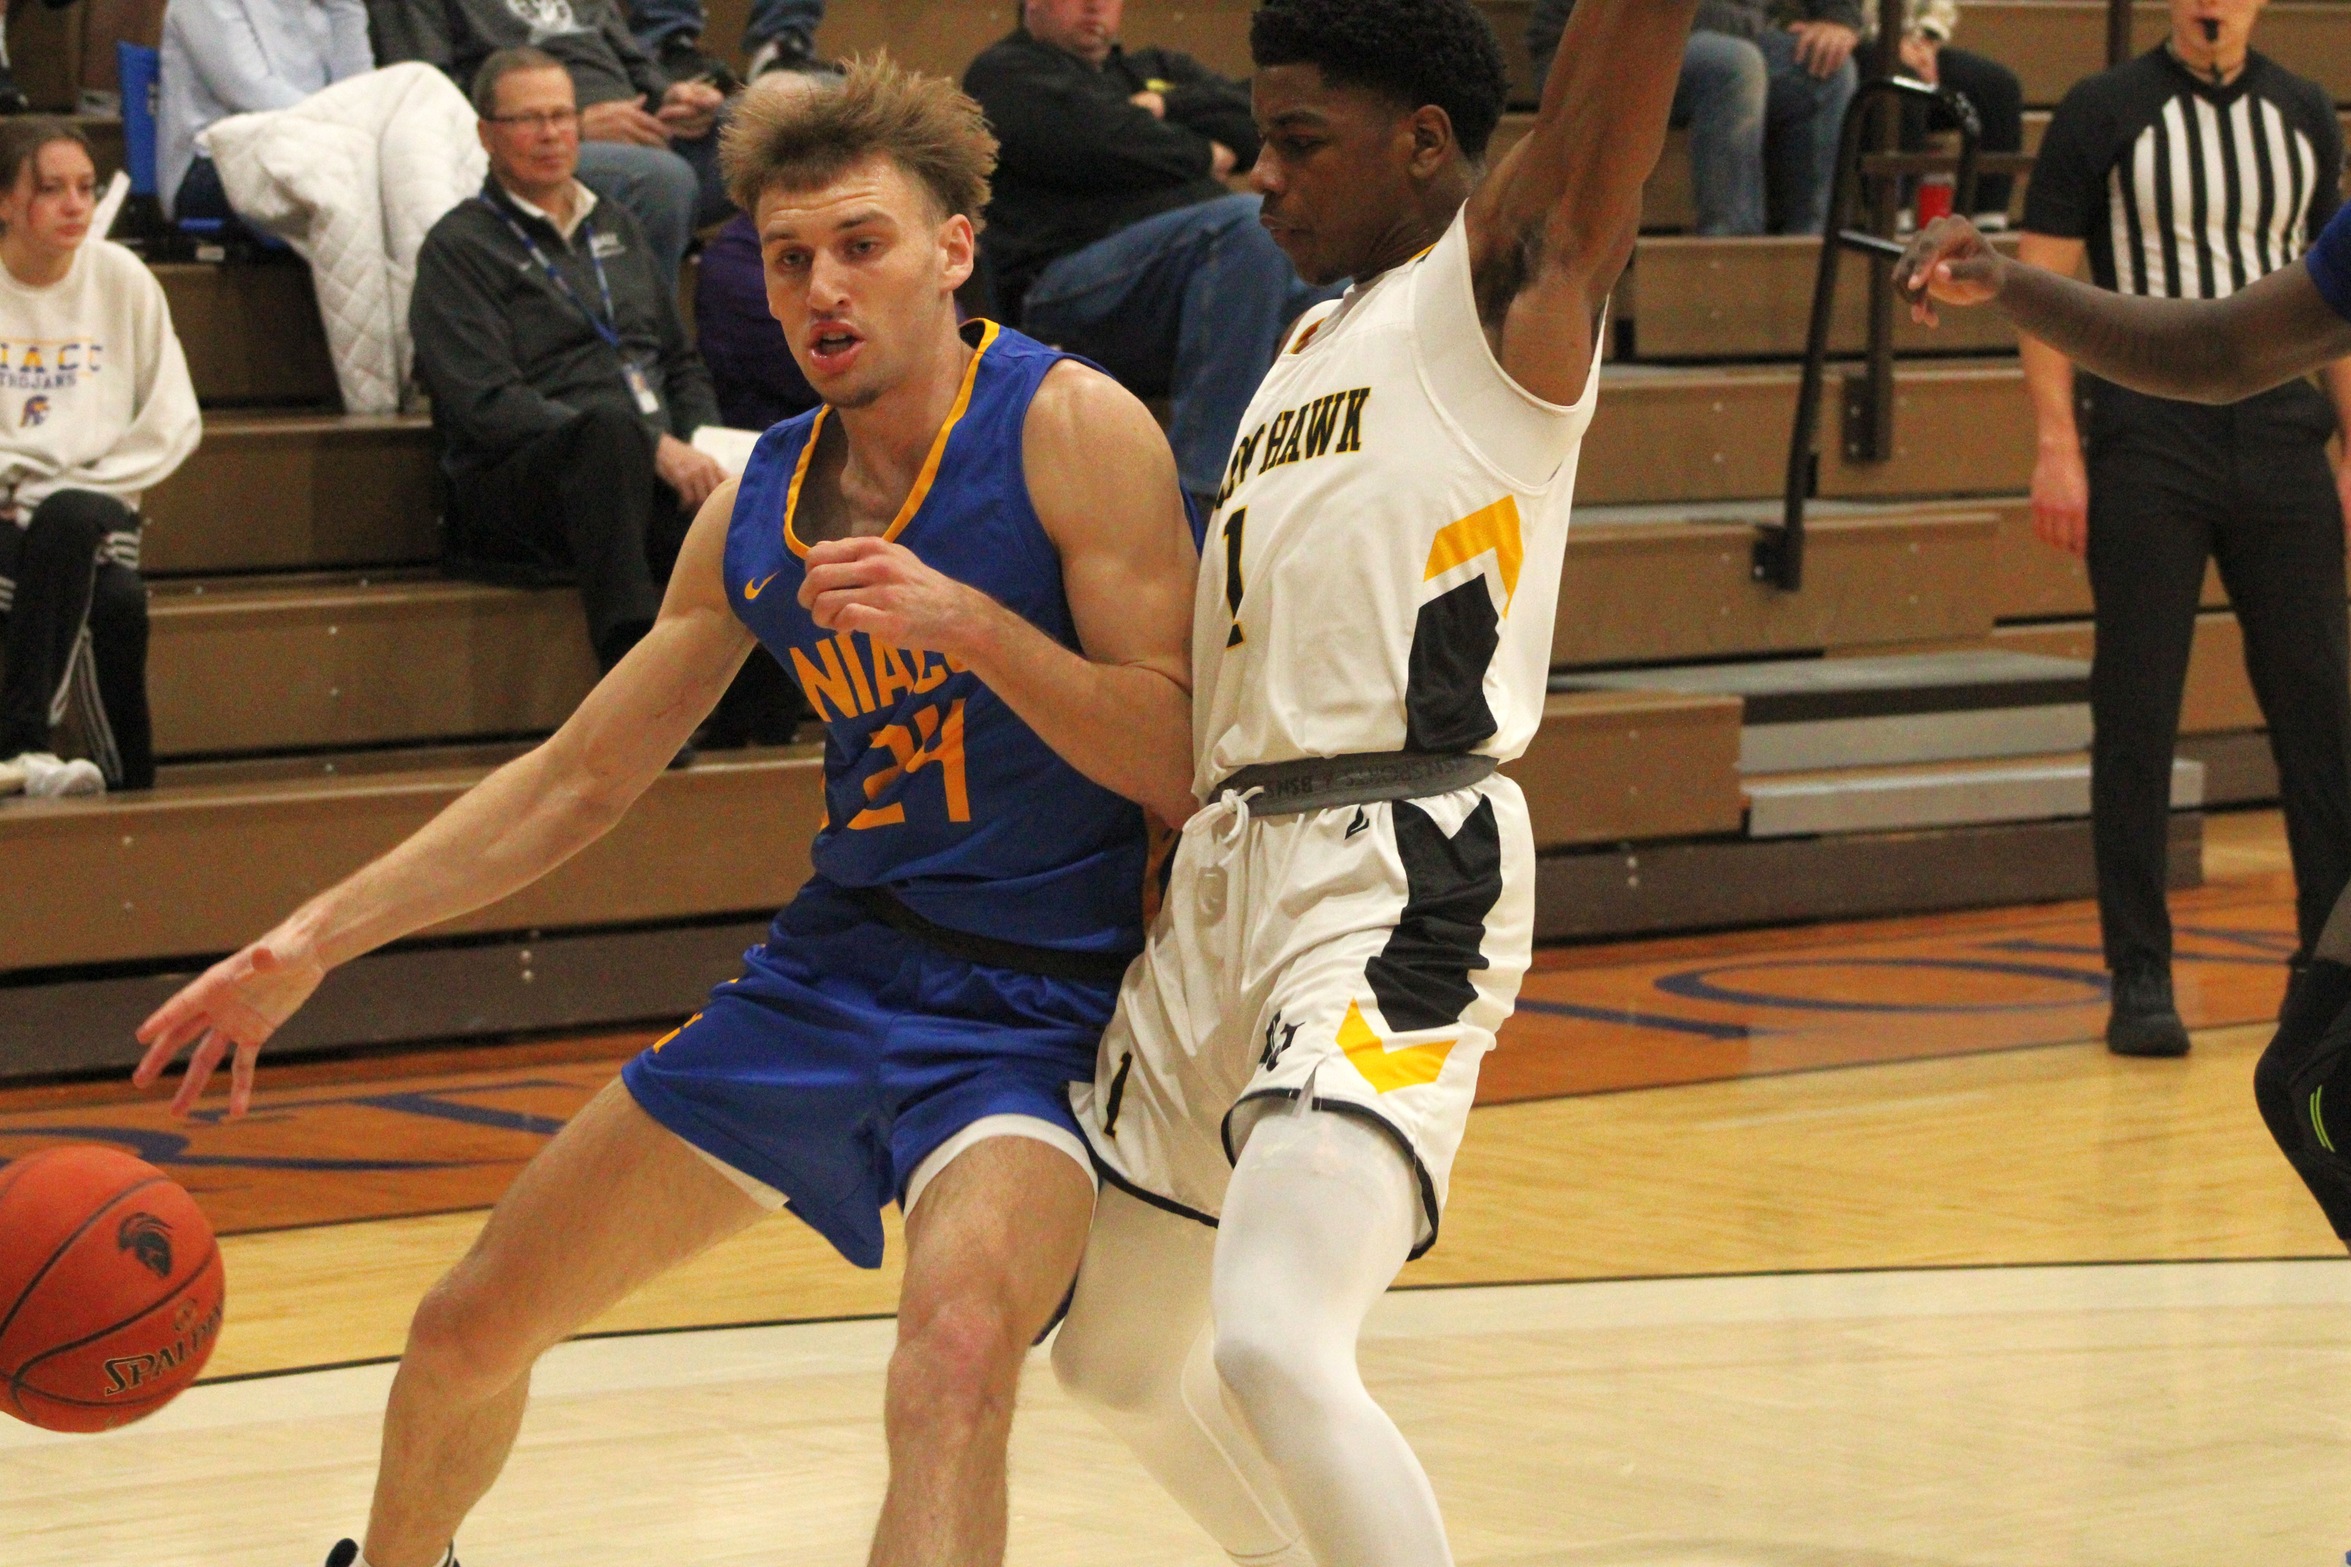 NIACC's Chett Helming drives to the basket in Friday's game against Black Hawk College-Moline.